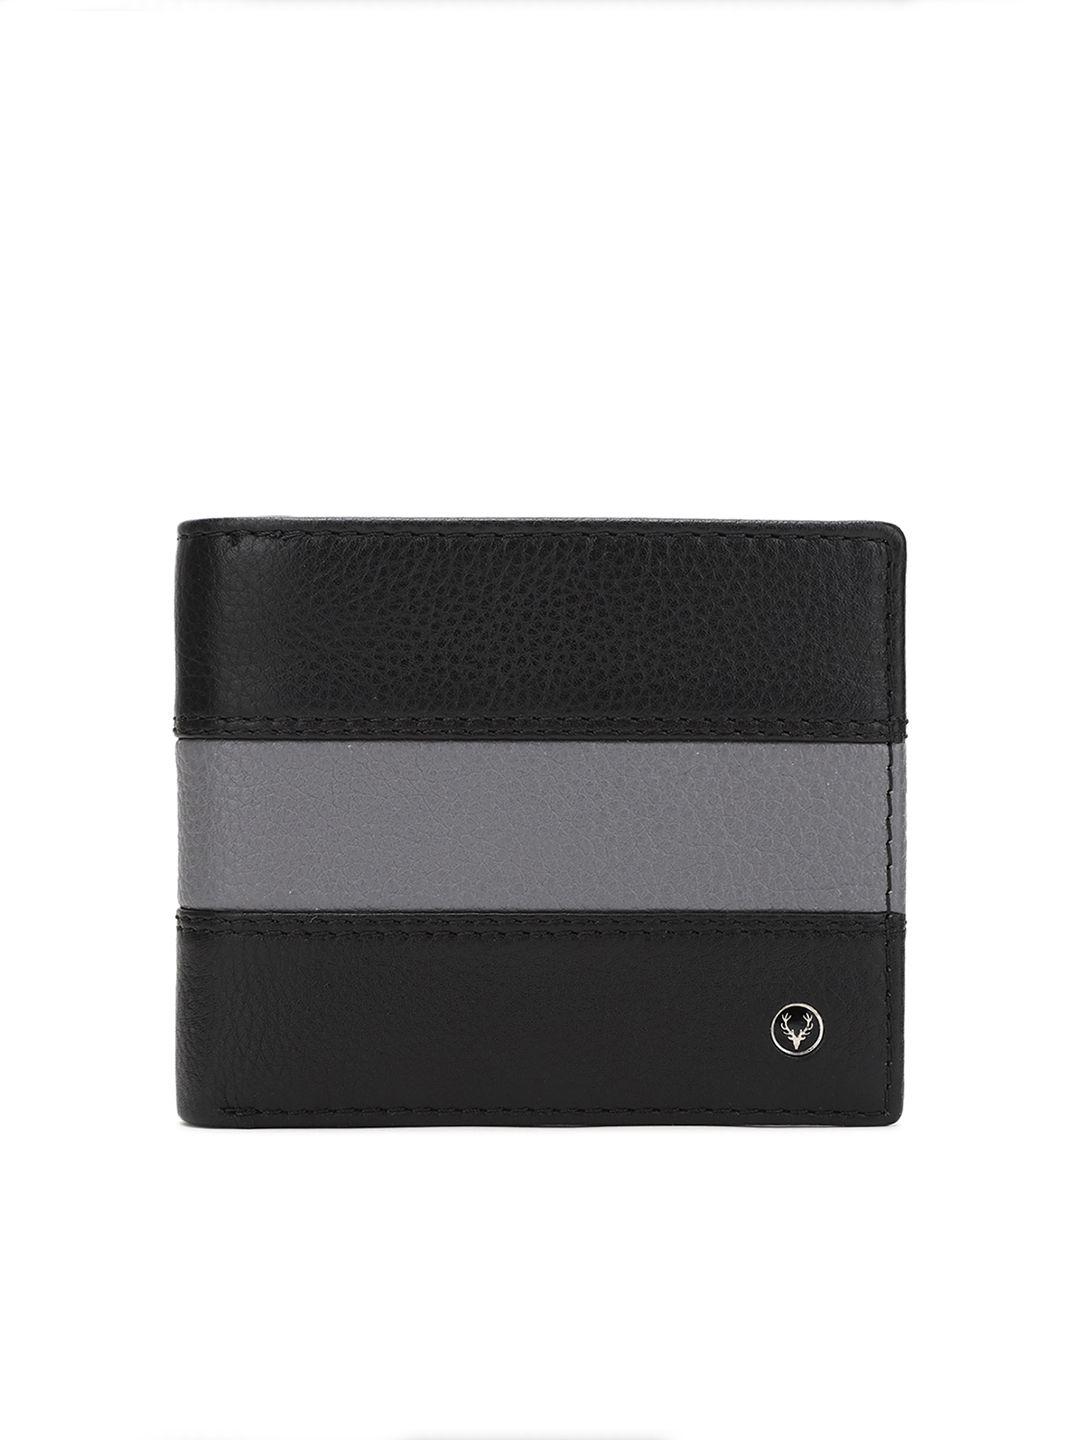 allen solly men black & grey striped solid leather two fold wallet with sd card holder